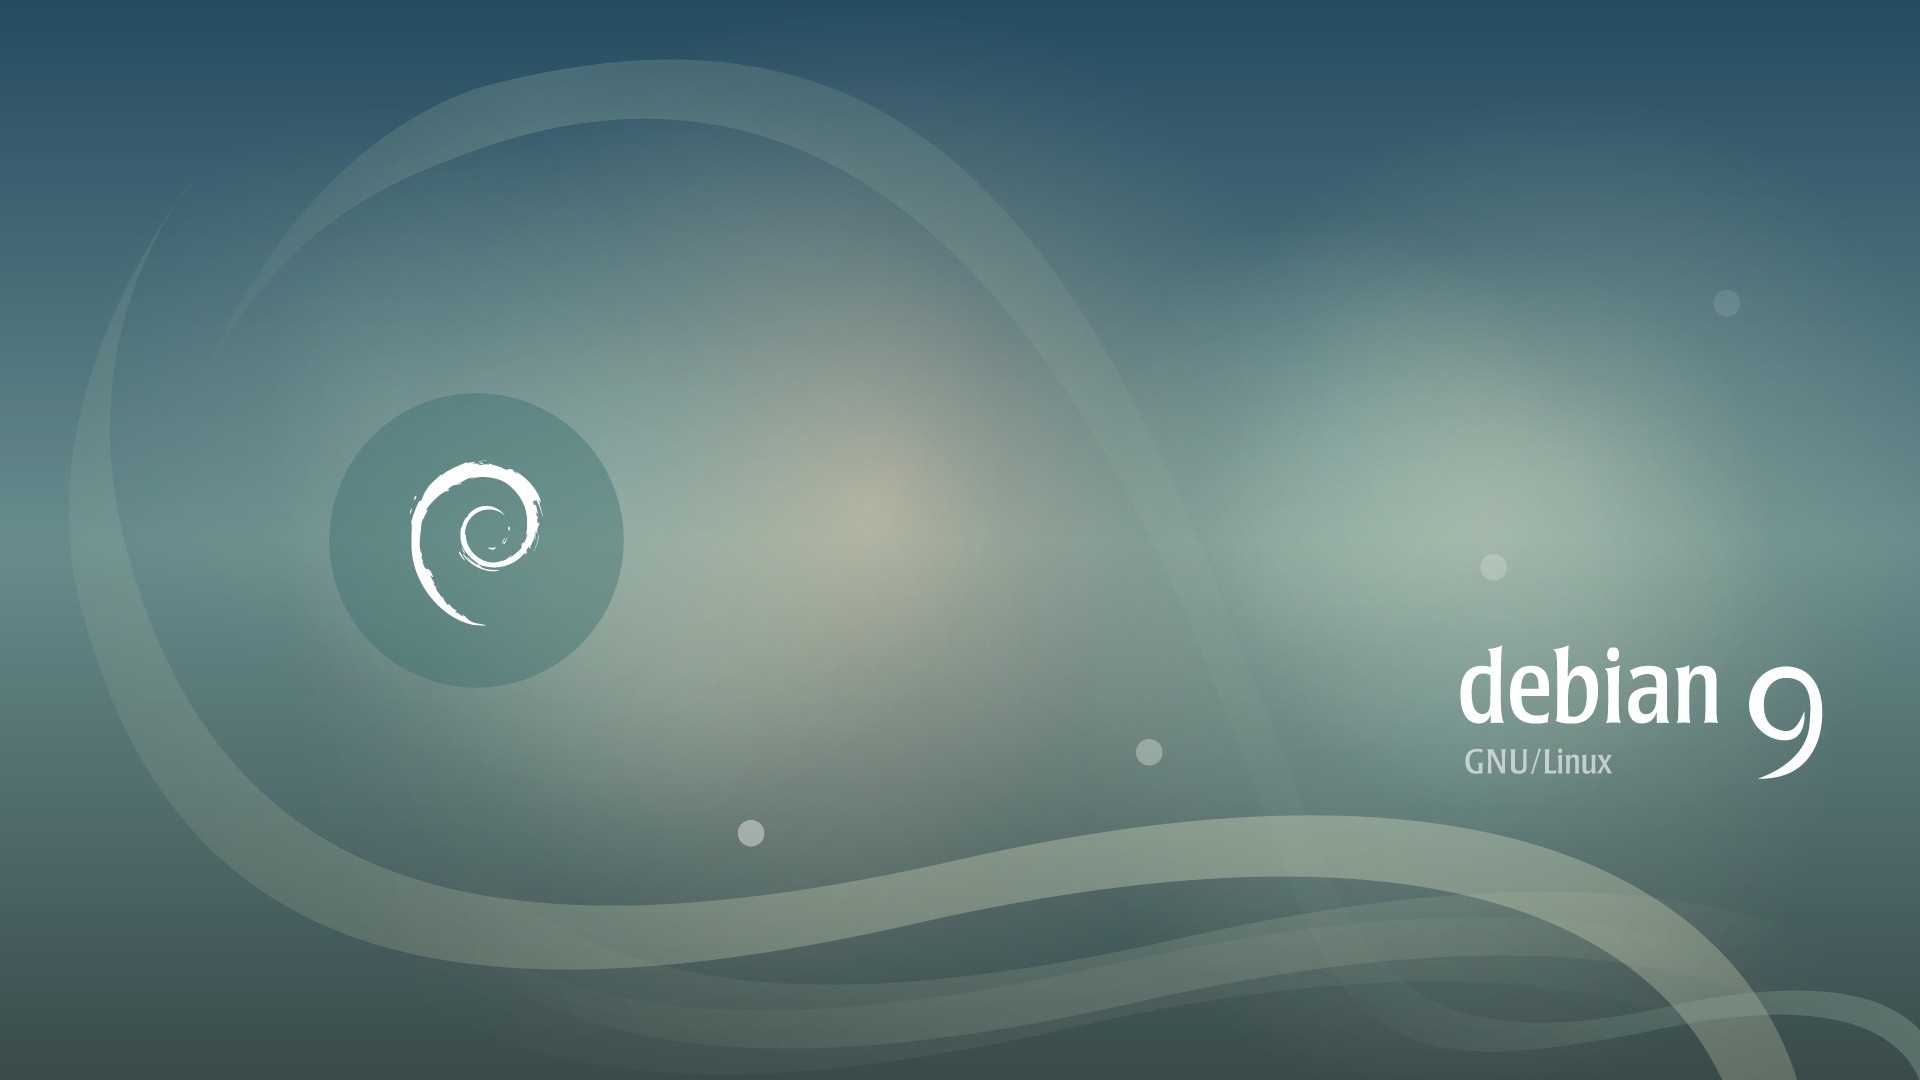 debian-re-releases-all-live-images-of-debian-gnu-linux-9-stretch-due-to-bugs-516603-2.jpg